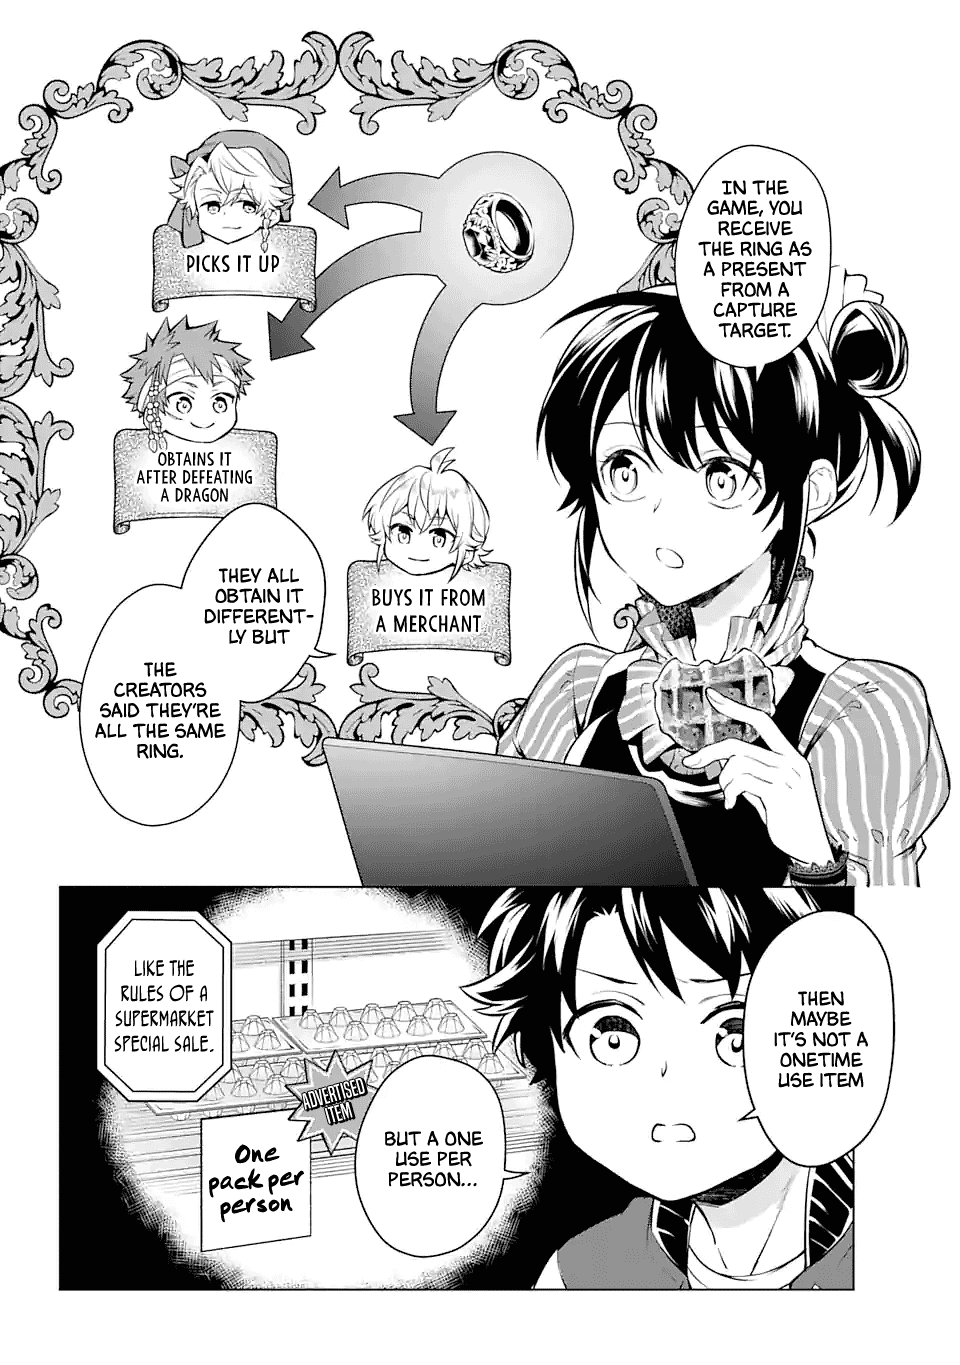 Transferred To Another World, But I'm Saving The World Of An Otome Game!? - Page 2